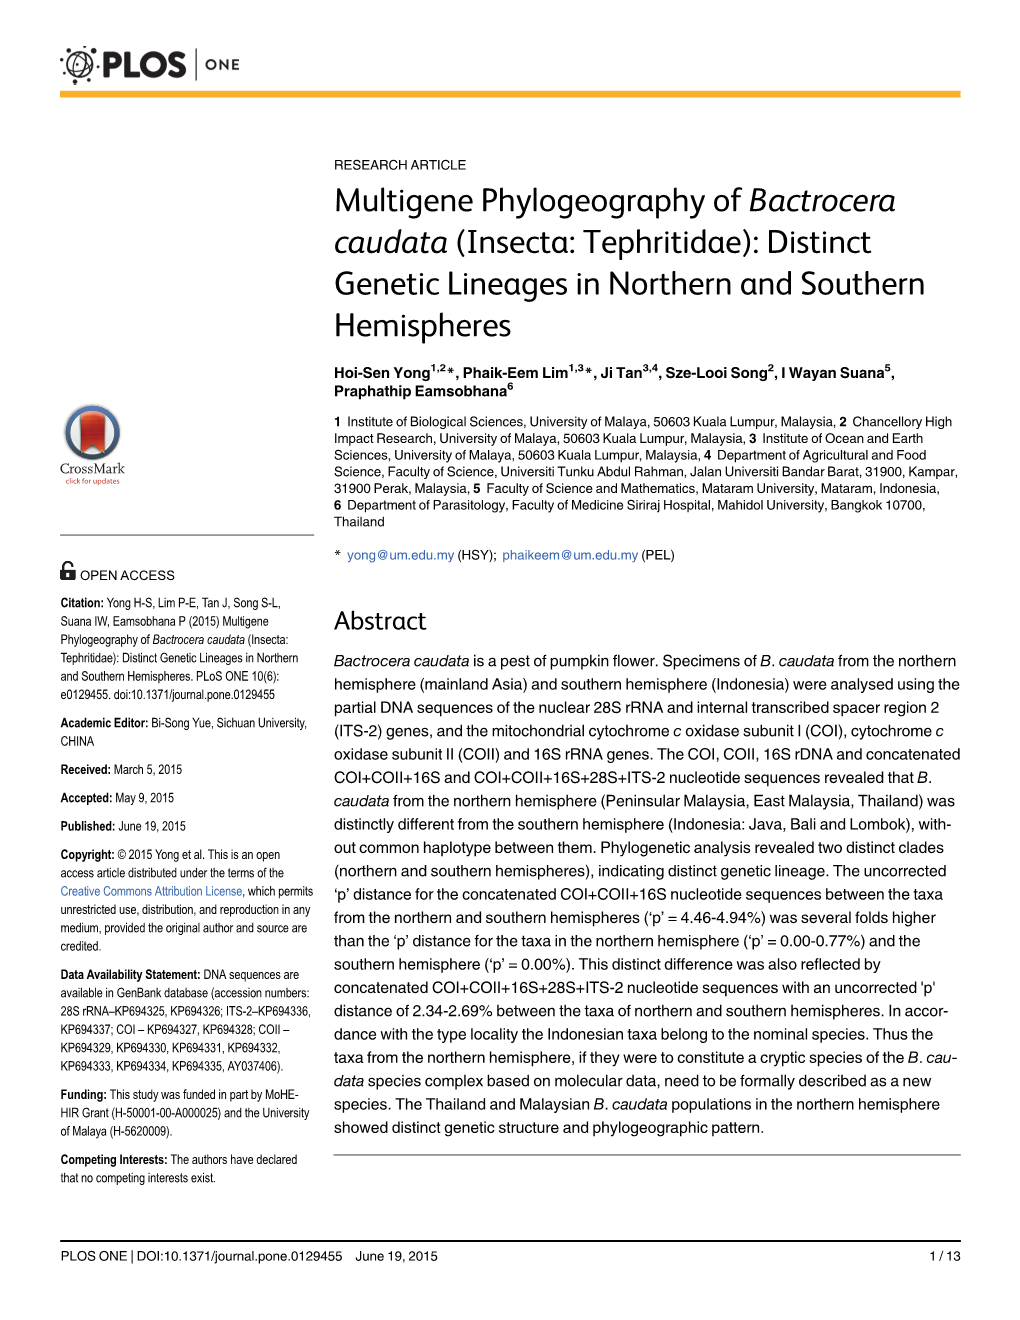 Multigene Phylogeography of Bactrocera Caudata (Insecta: Tephritidae): Distinct Genetic Lineages in Northern and Southern Hemispheres